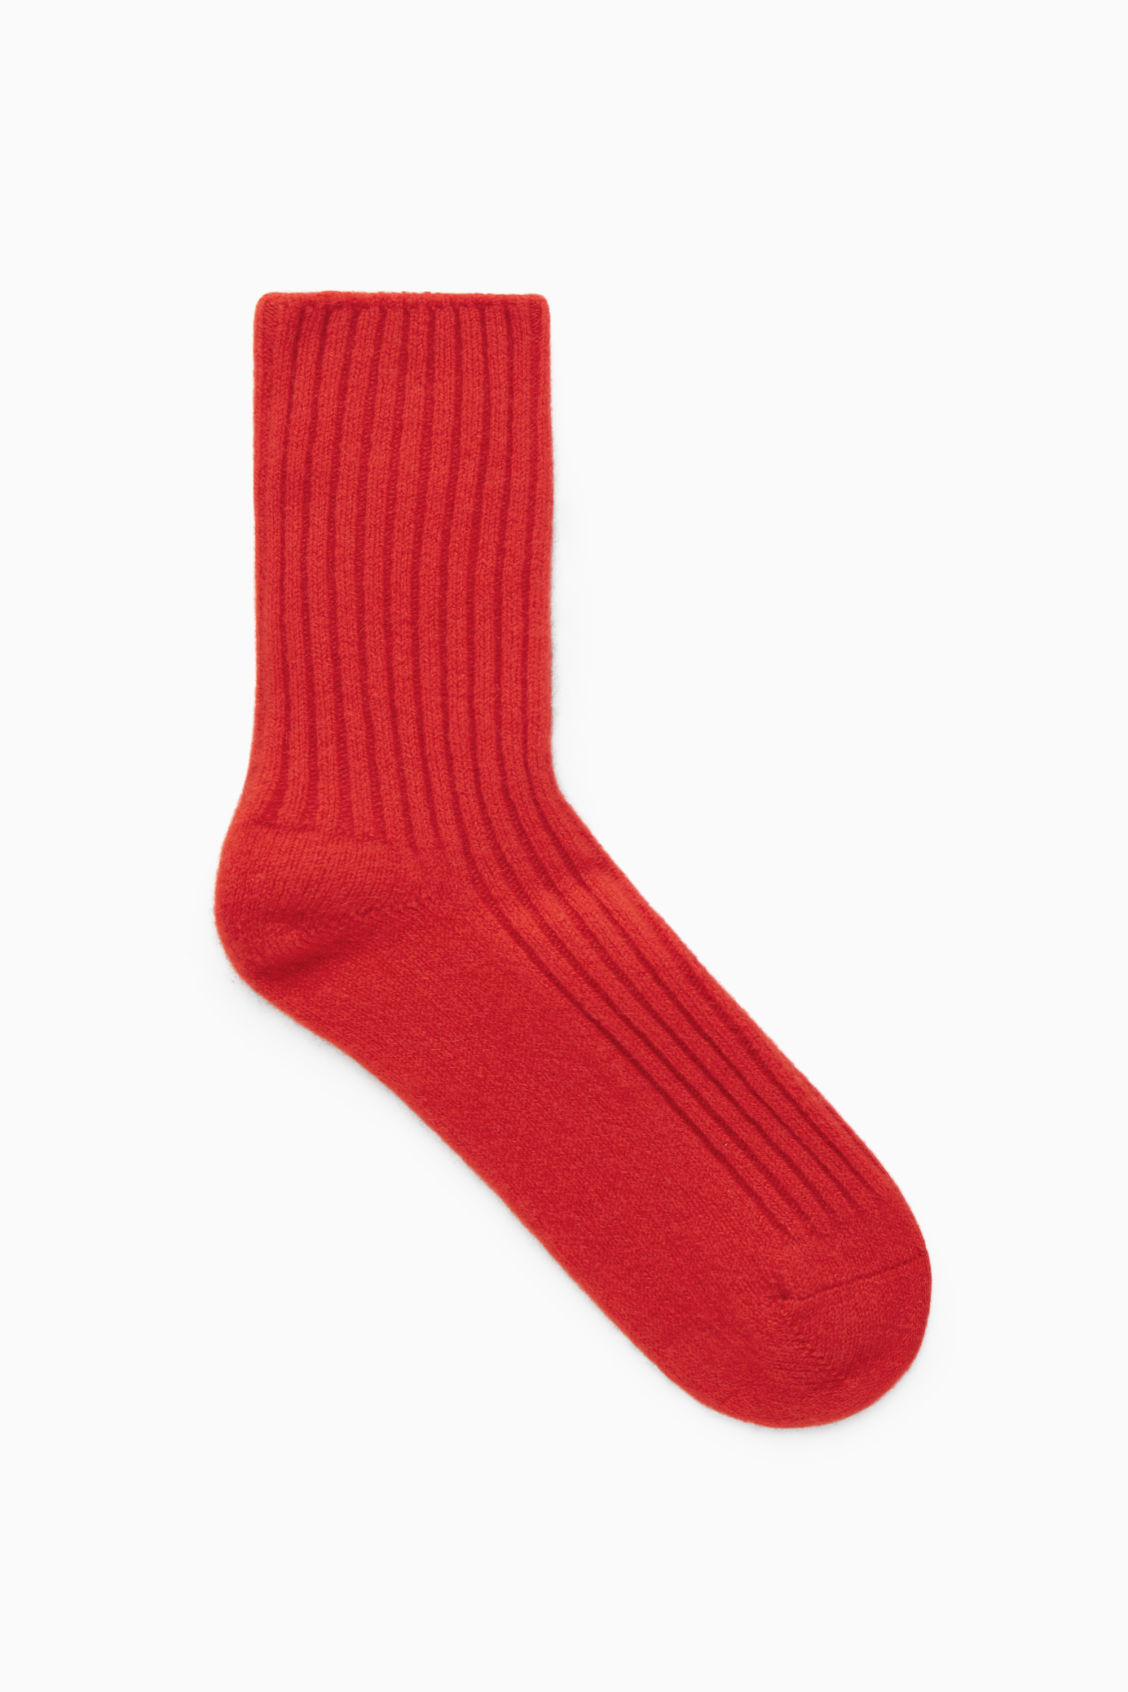 COS + Ribbed Cashmere Socks in Bright Red